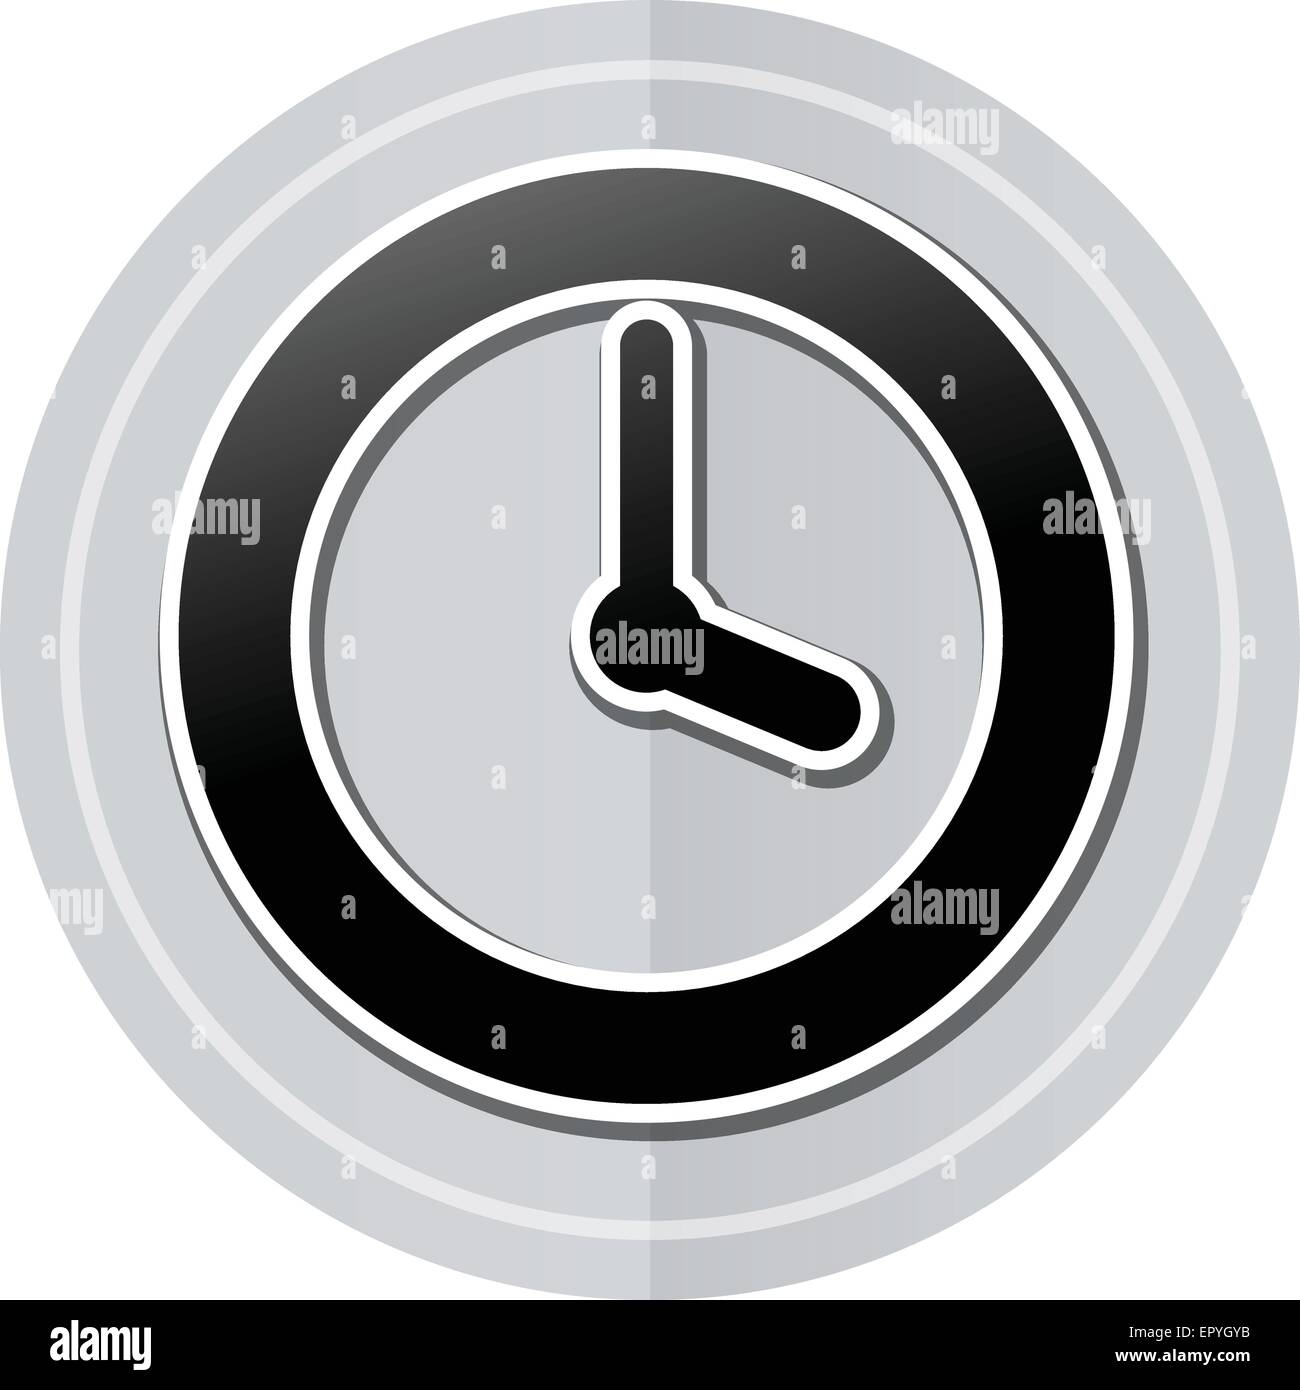 Illustration of time sticker icon simple design Stock Vector